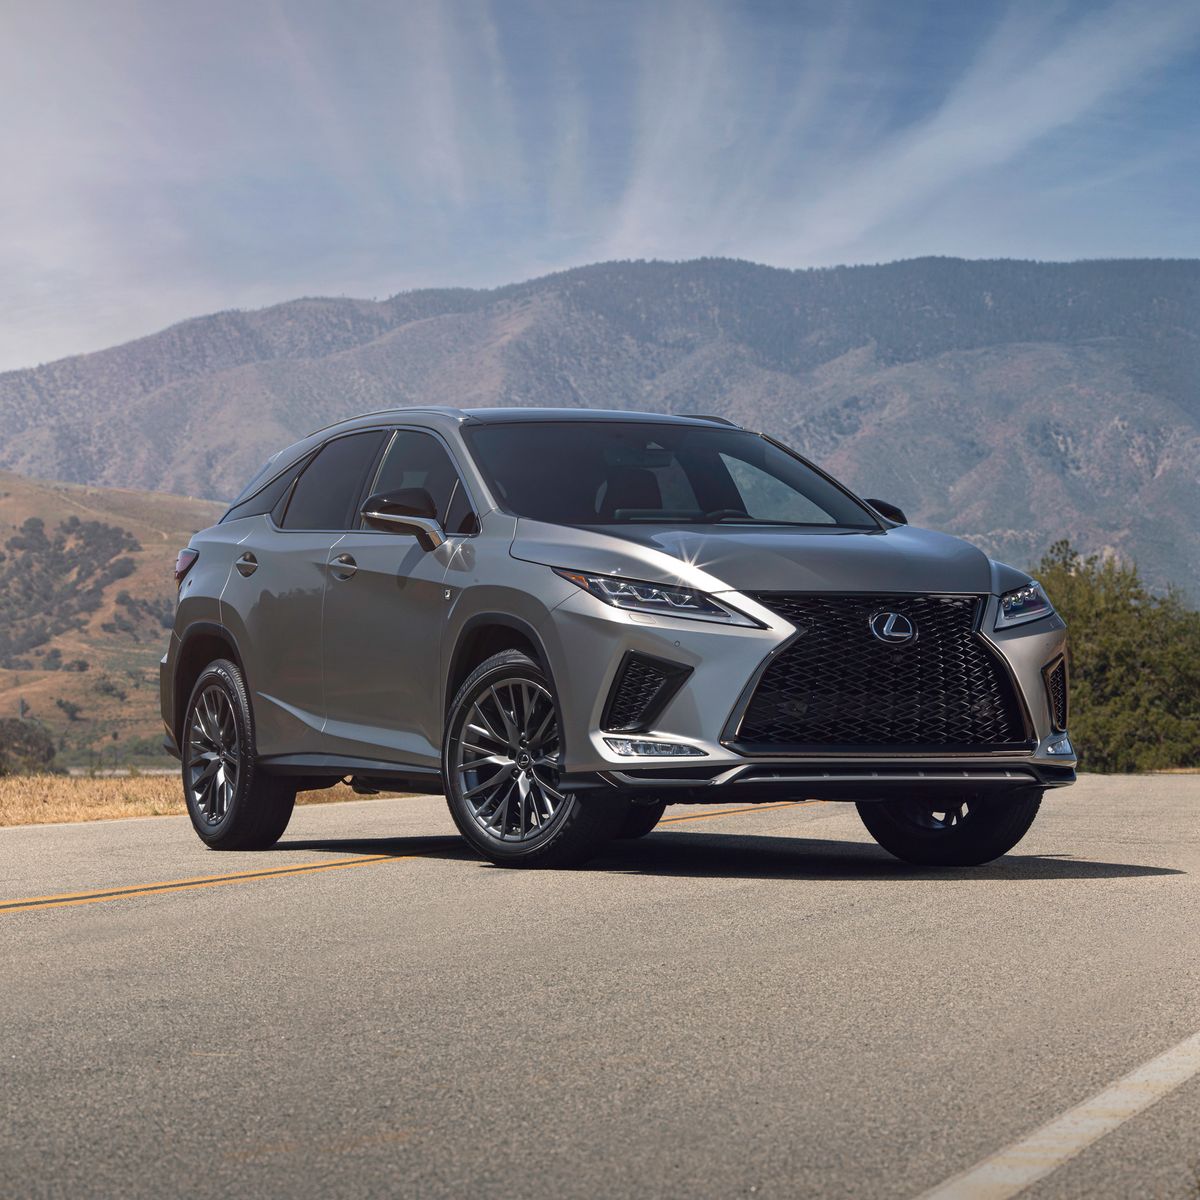 2020 Lexus RX350 and RX450h - Details of Updated Models